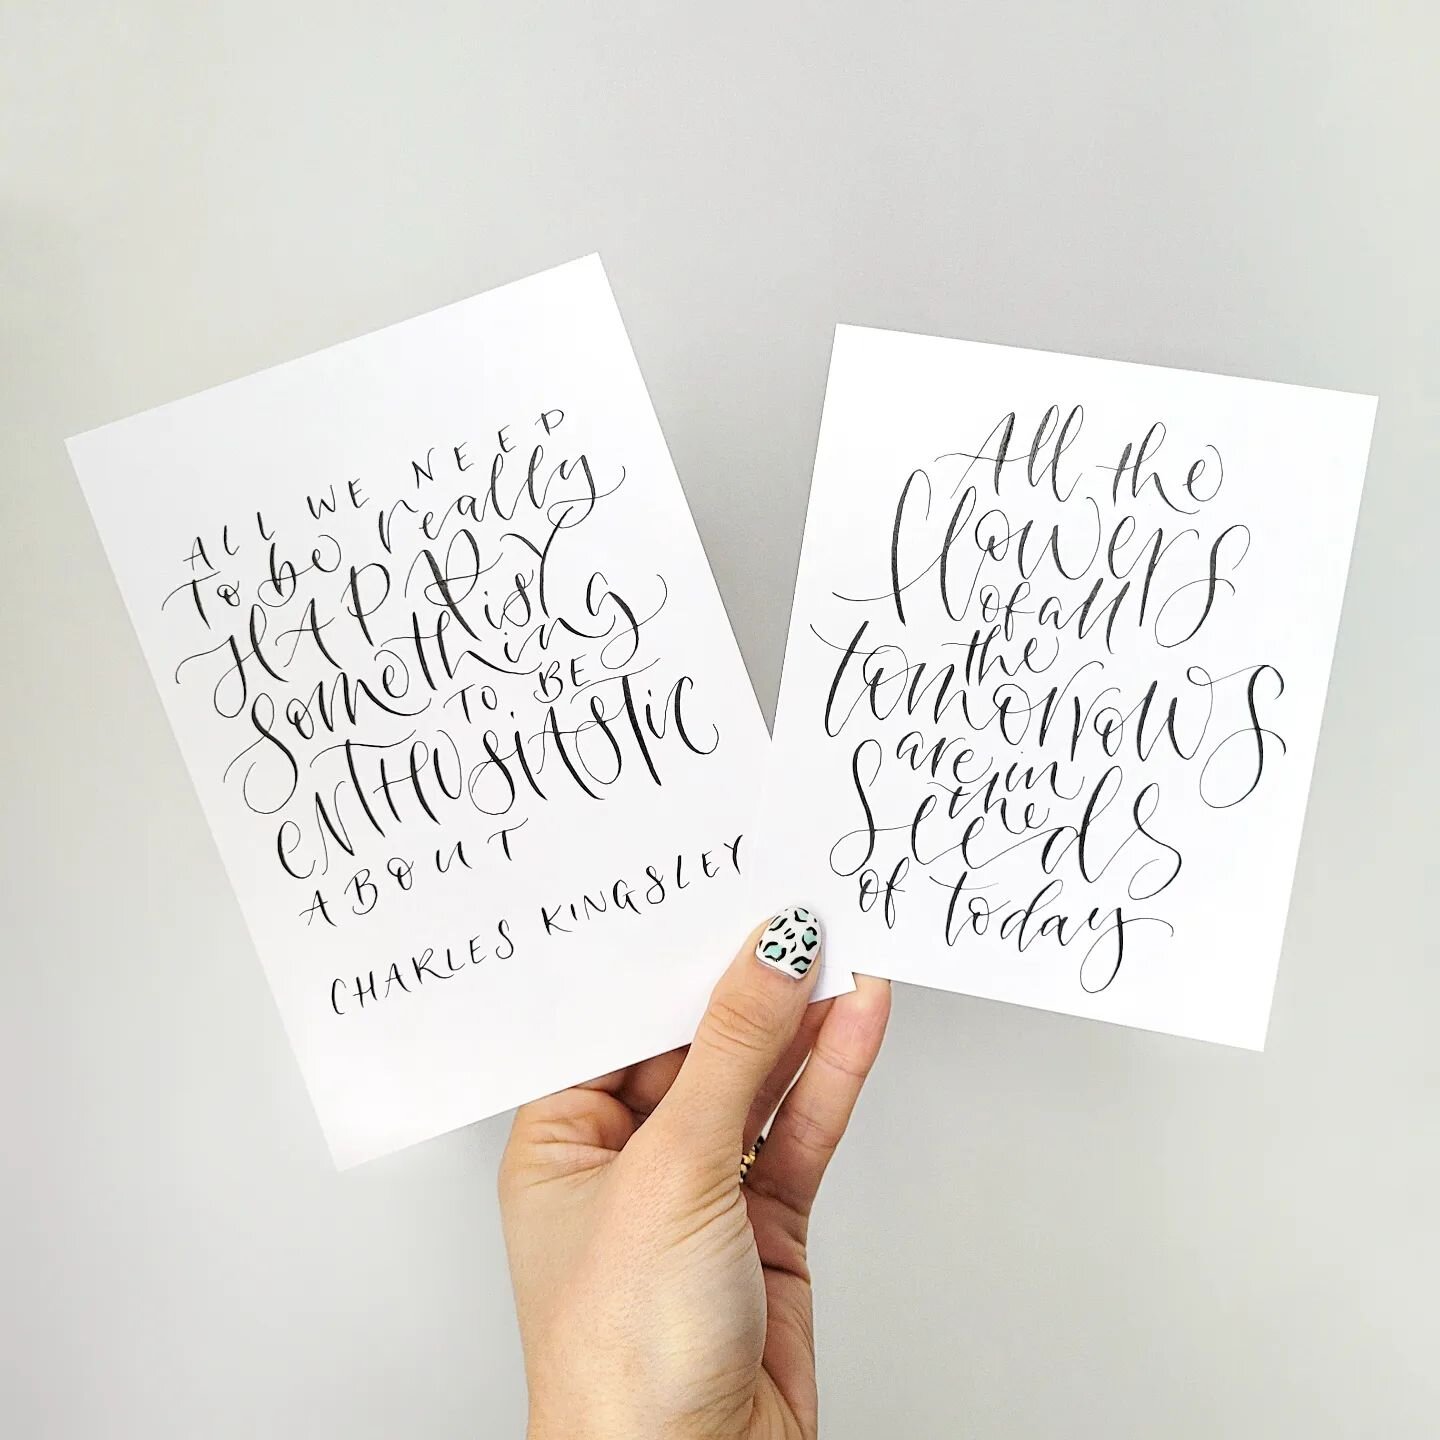 I love working with bright colours but sometimes you just cannot beat the beauty of black ink on crisp white card.

These are just two of the pieces you'll be able to create in my  workshops with @themoderncalligraphyco 
The templates we will use hav